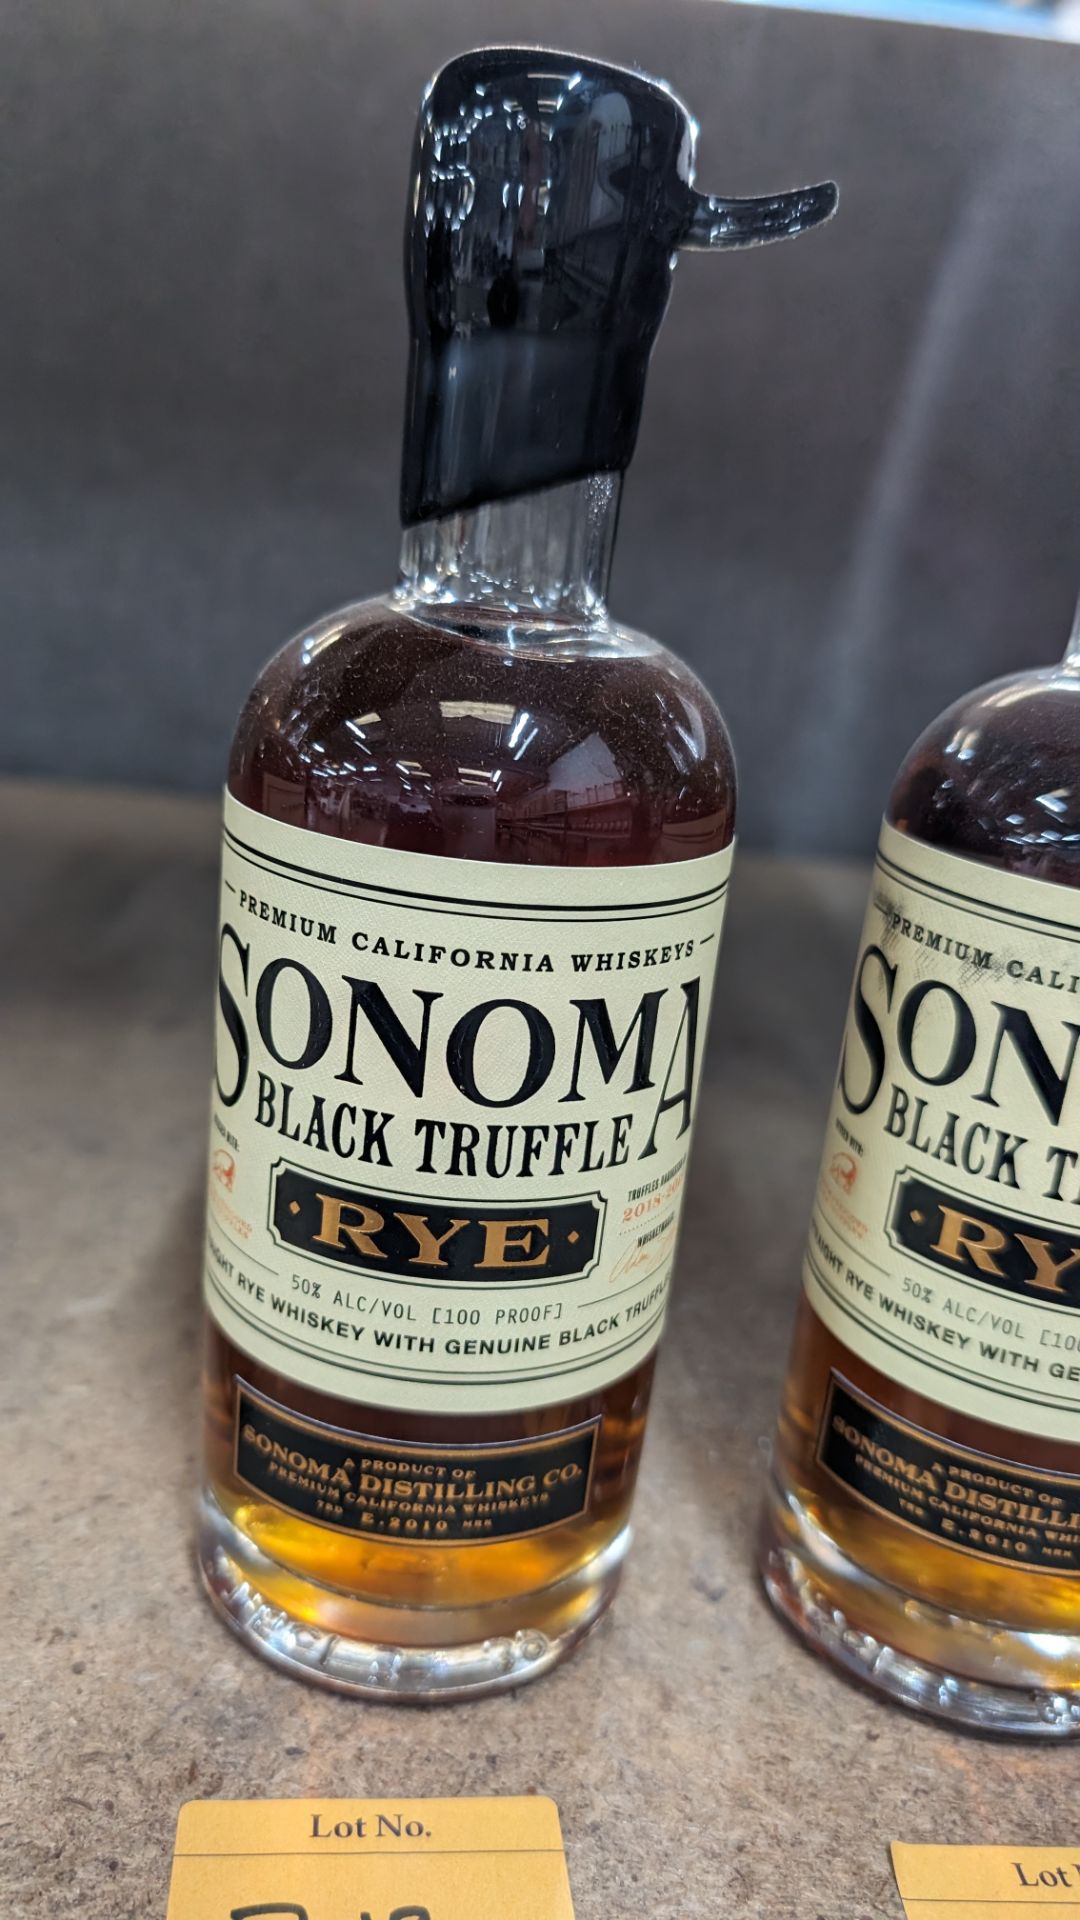 1 off 375ml bottle of Sonoma Black Truffle Rye Whiskey. 50% alc/vol (100 proof). Straight rye whis - Image 2 of 5